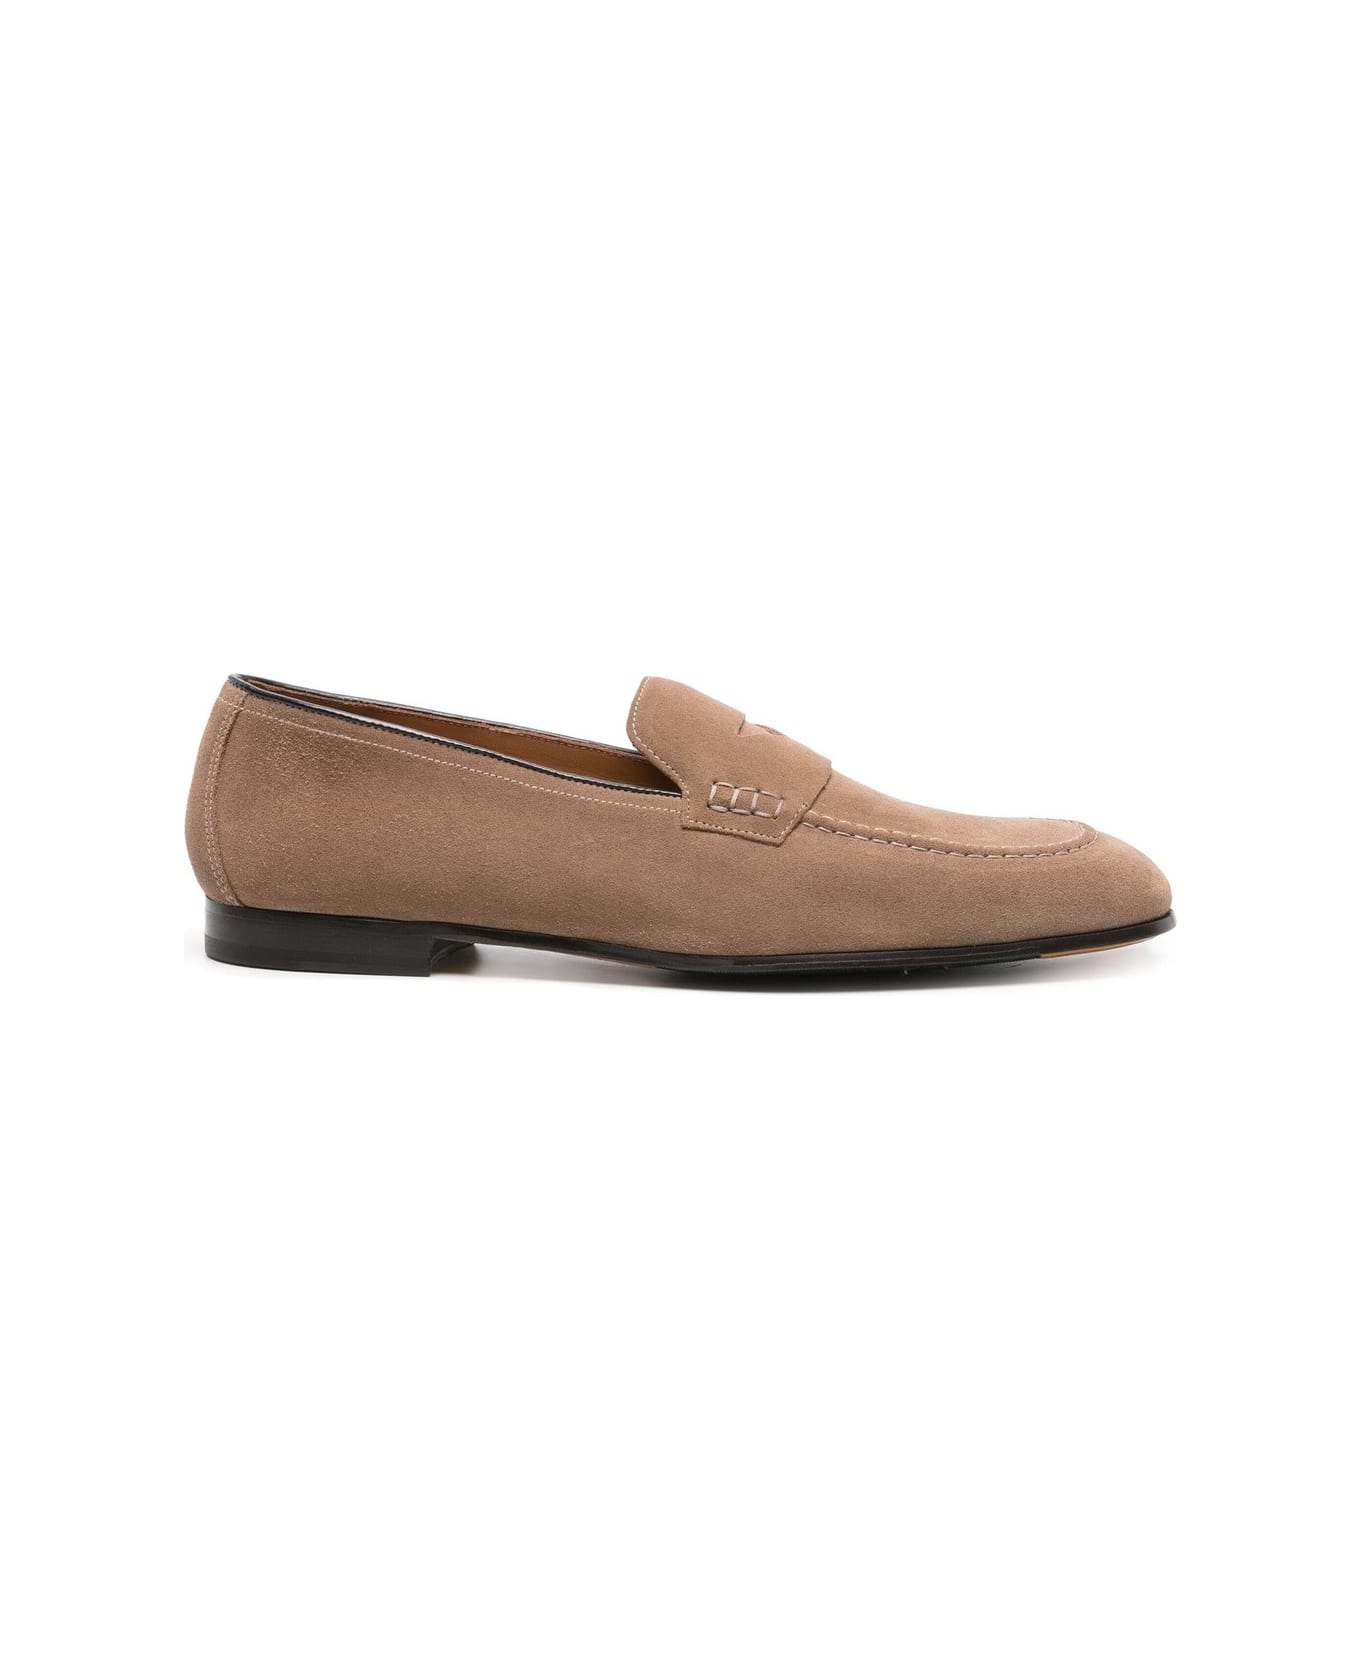 Doucal's Dark Beige Suede Penny Loafers - Brown ローファー＆デッキシューズ